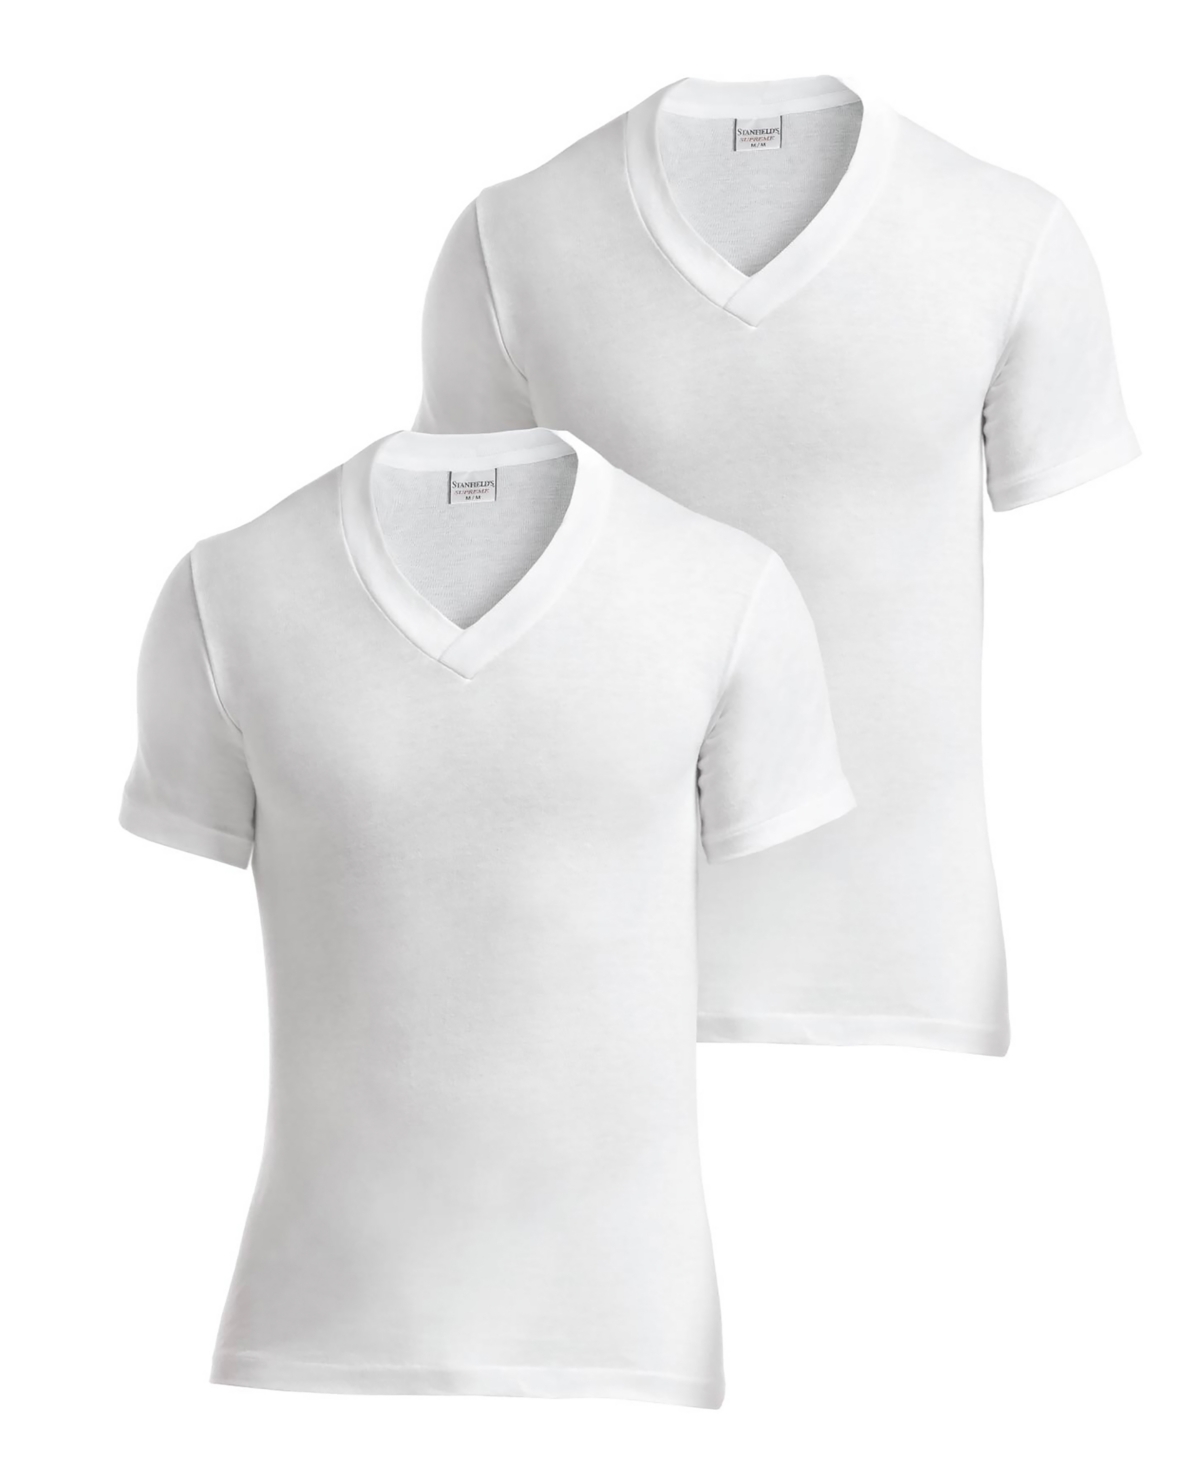 Stanfield's Men's Supreme Cotton Blend V-neck Undershirts, Pack Of 2 In White